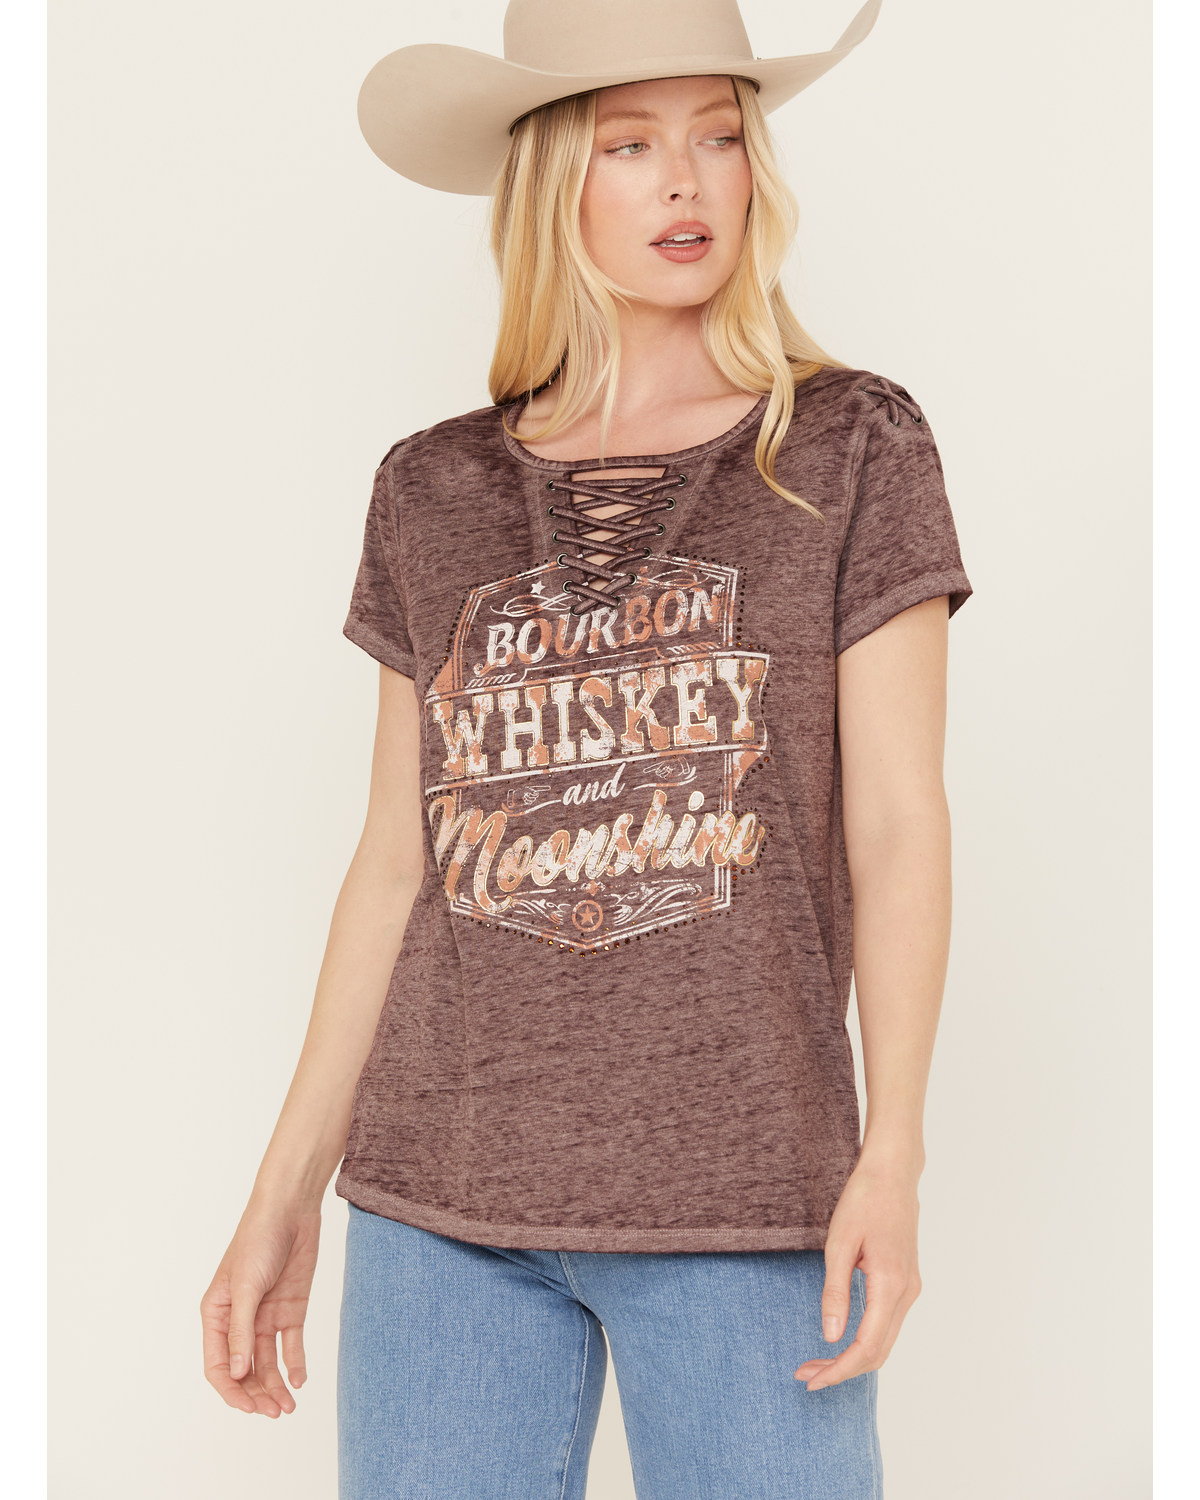 Blended Women's Whiskey Lace-Up Graphic Tee